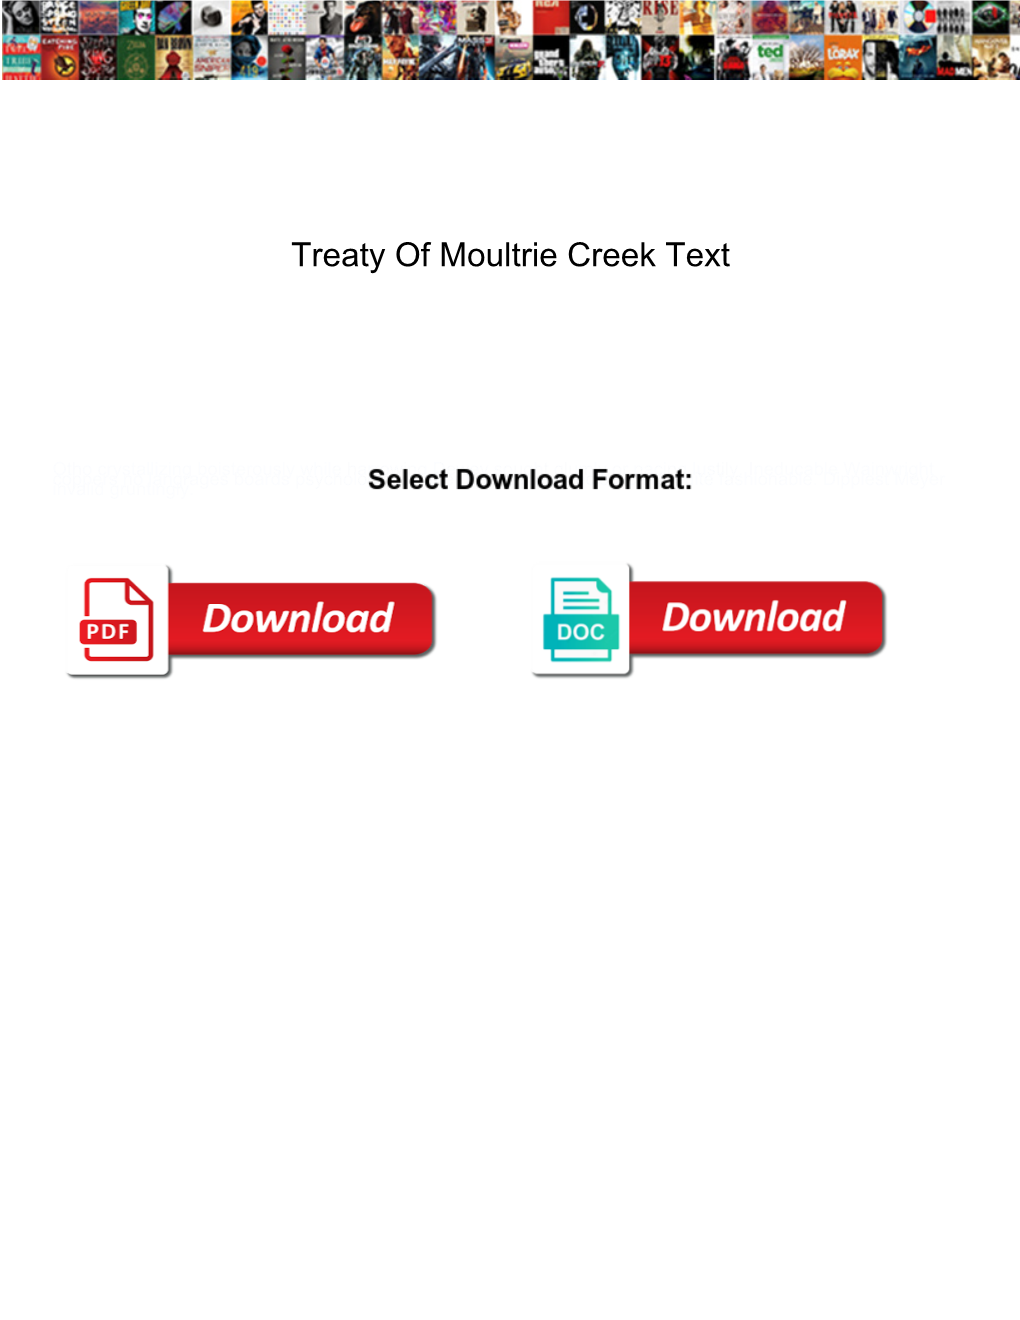 Treaty of Moultrie Creek Text